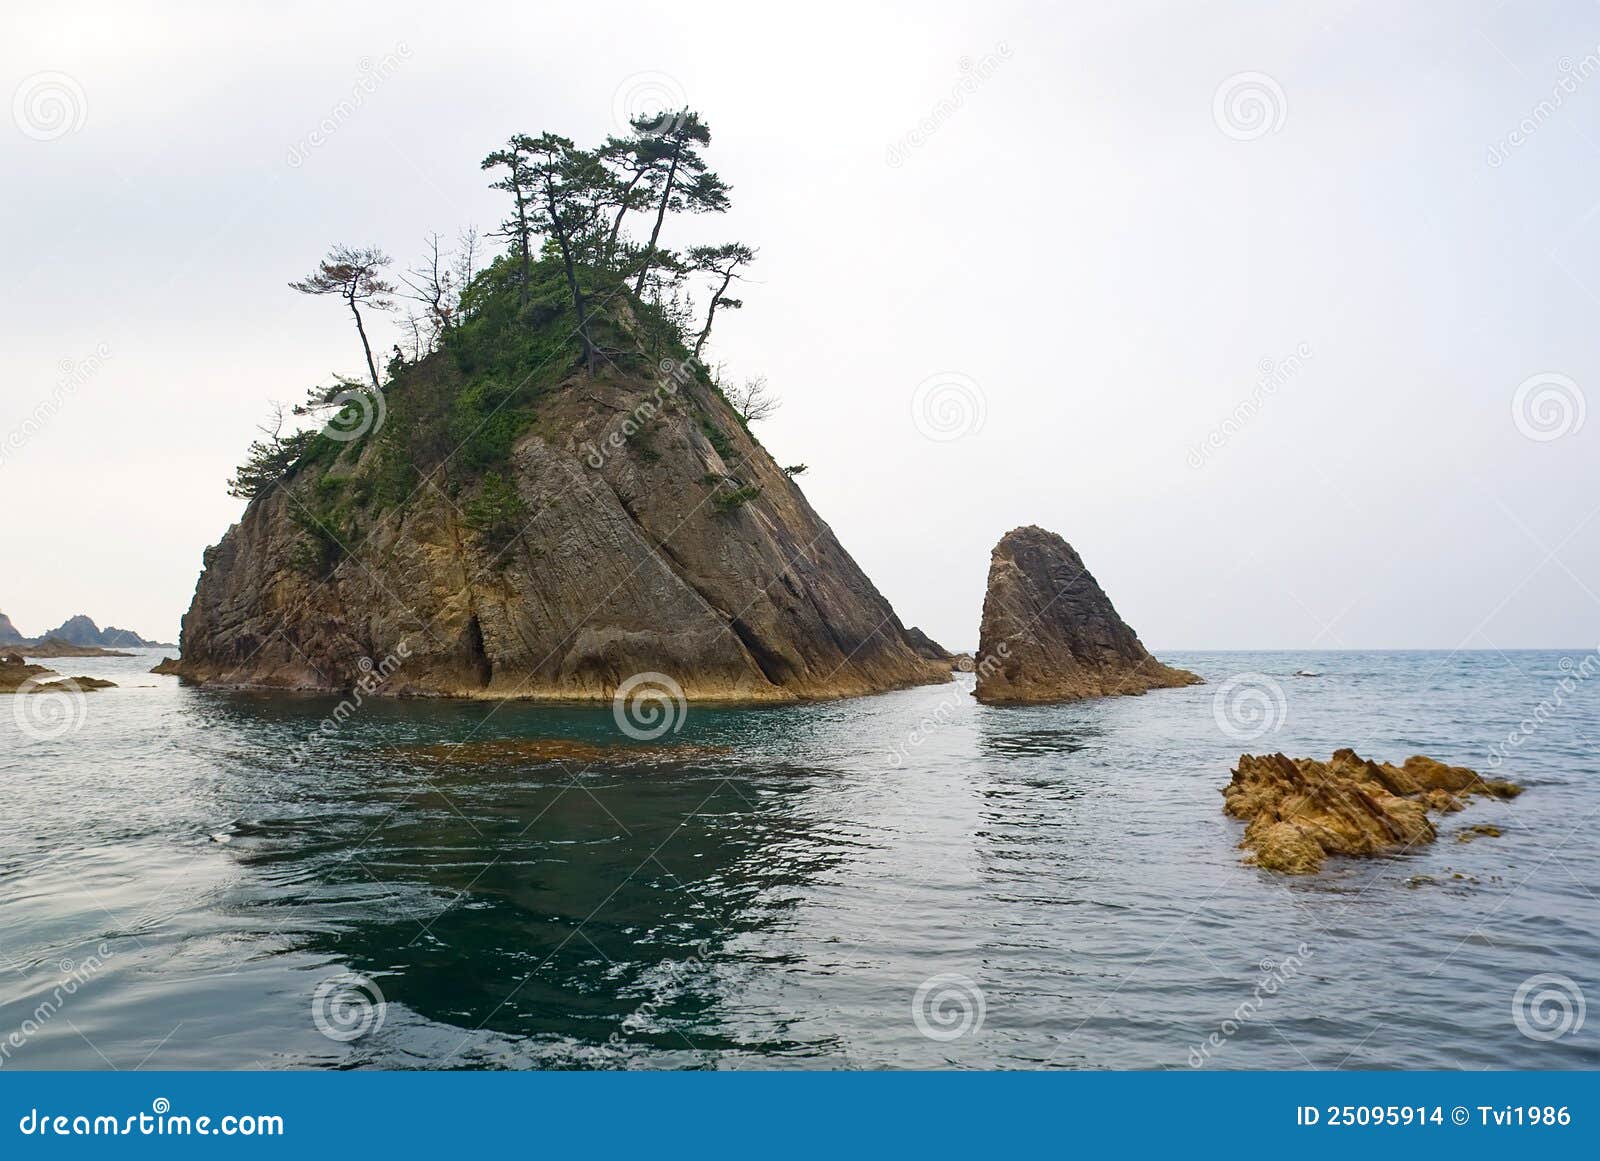 the rock and the islet